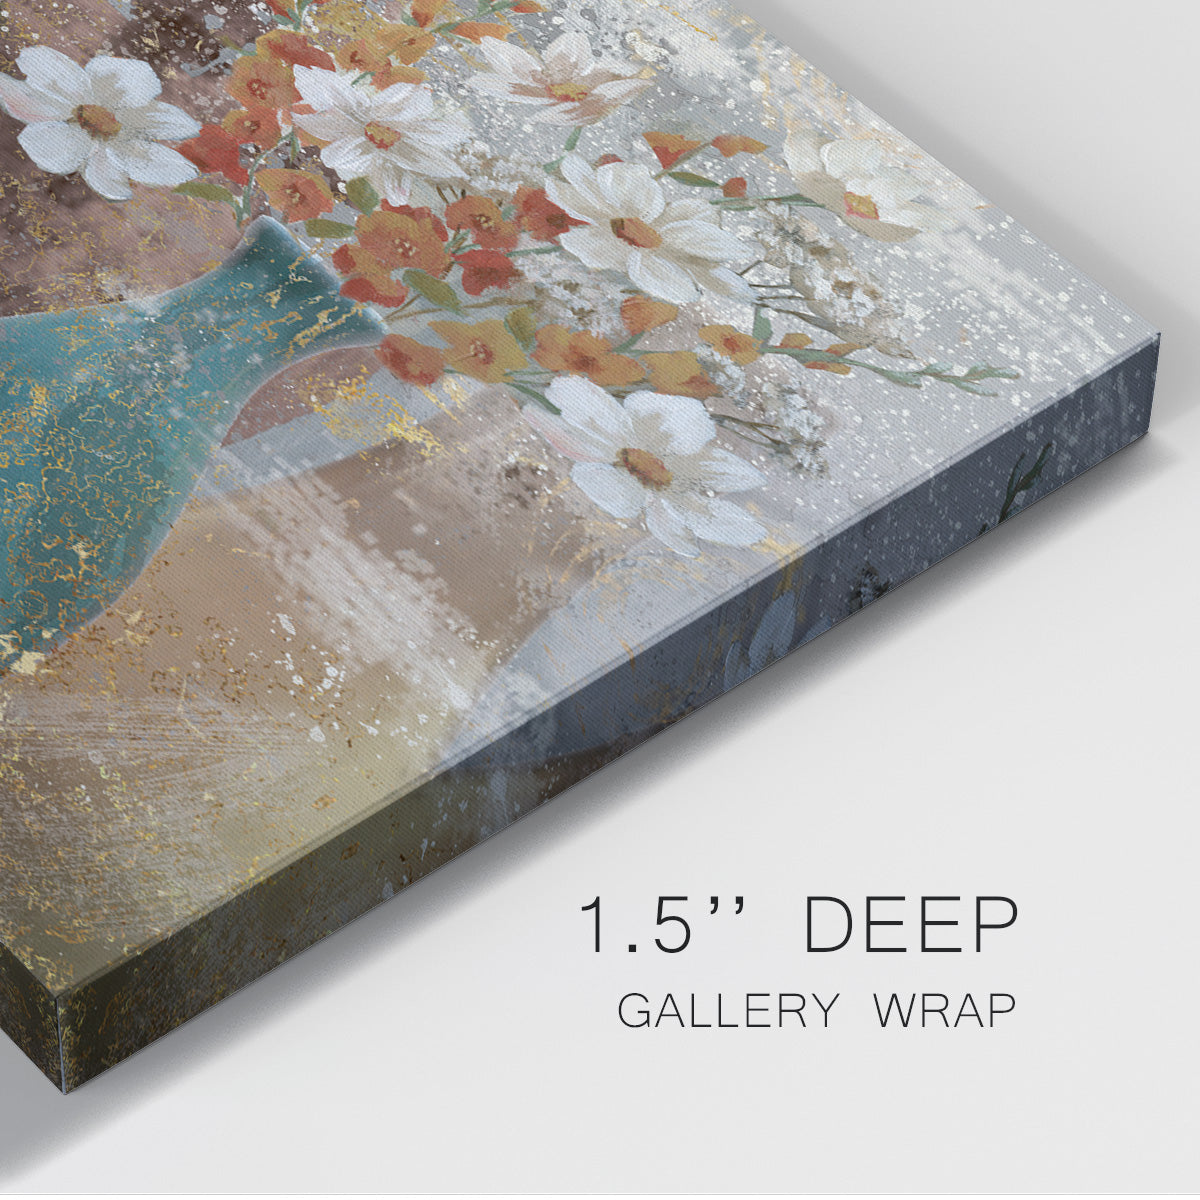 Vessels and Blooms Spice Premium Gallery Wrapped Canvas - Ready to Hang